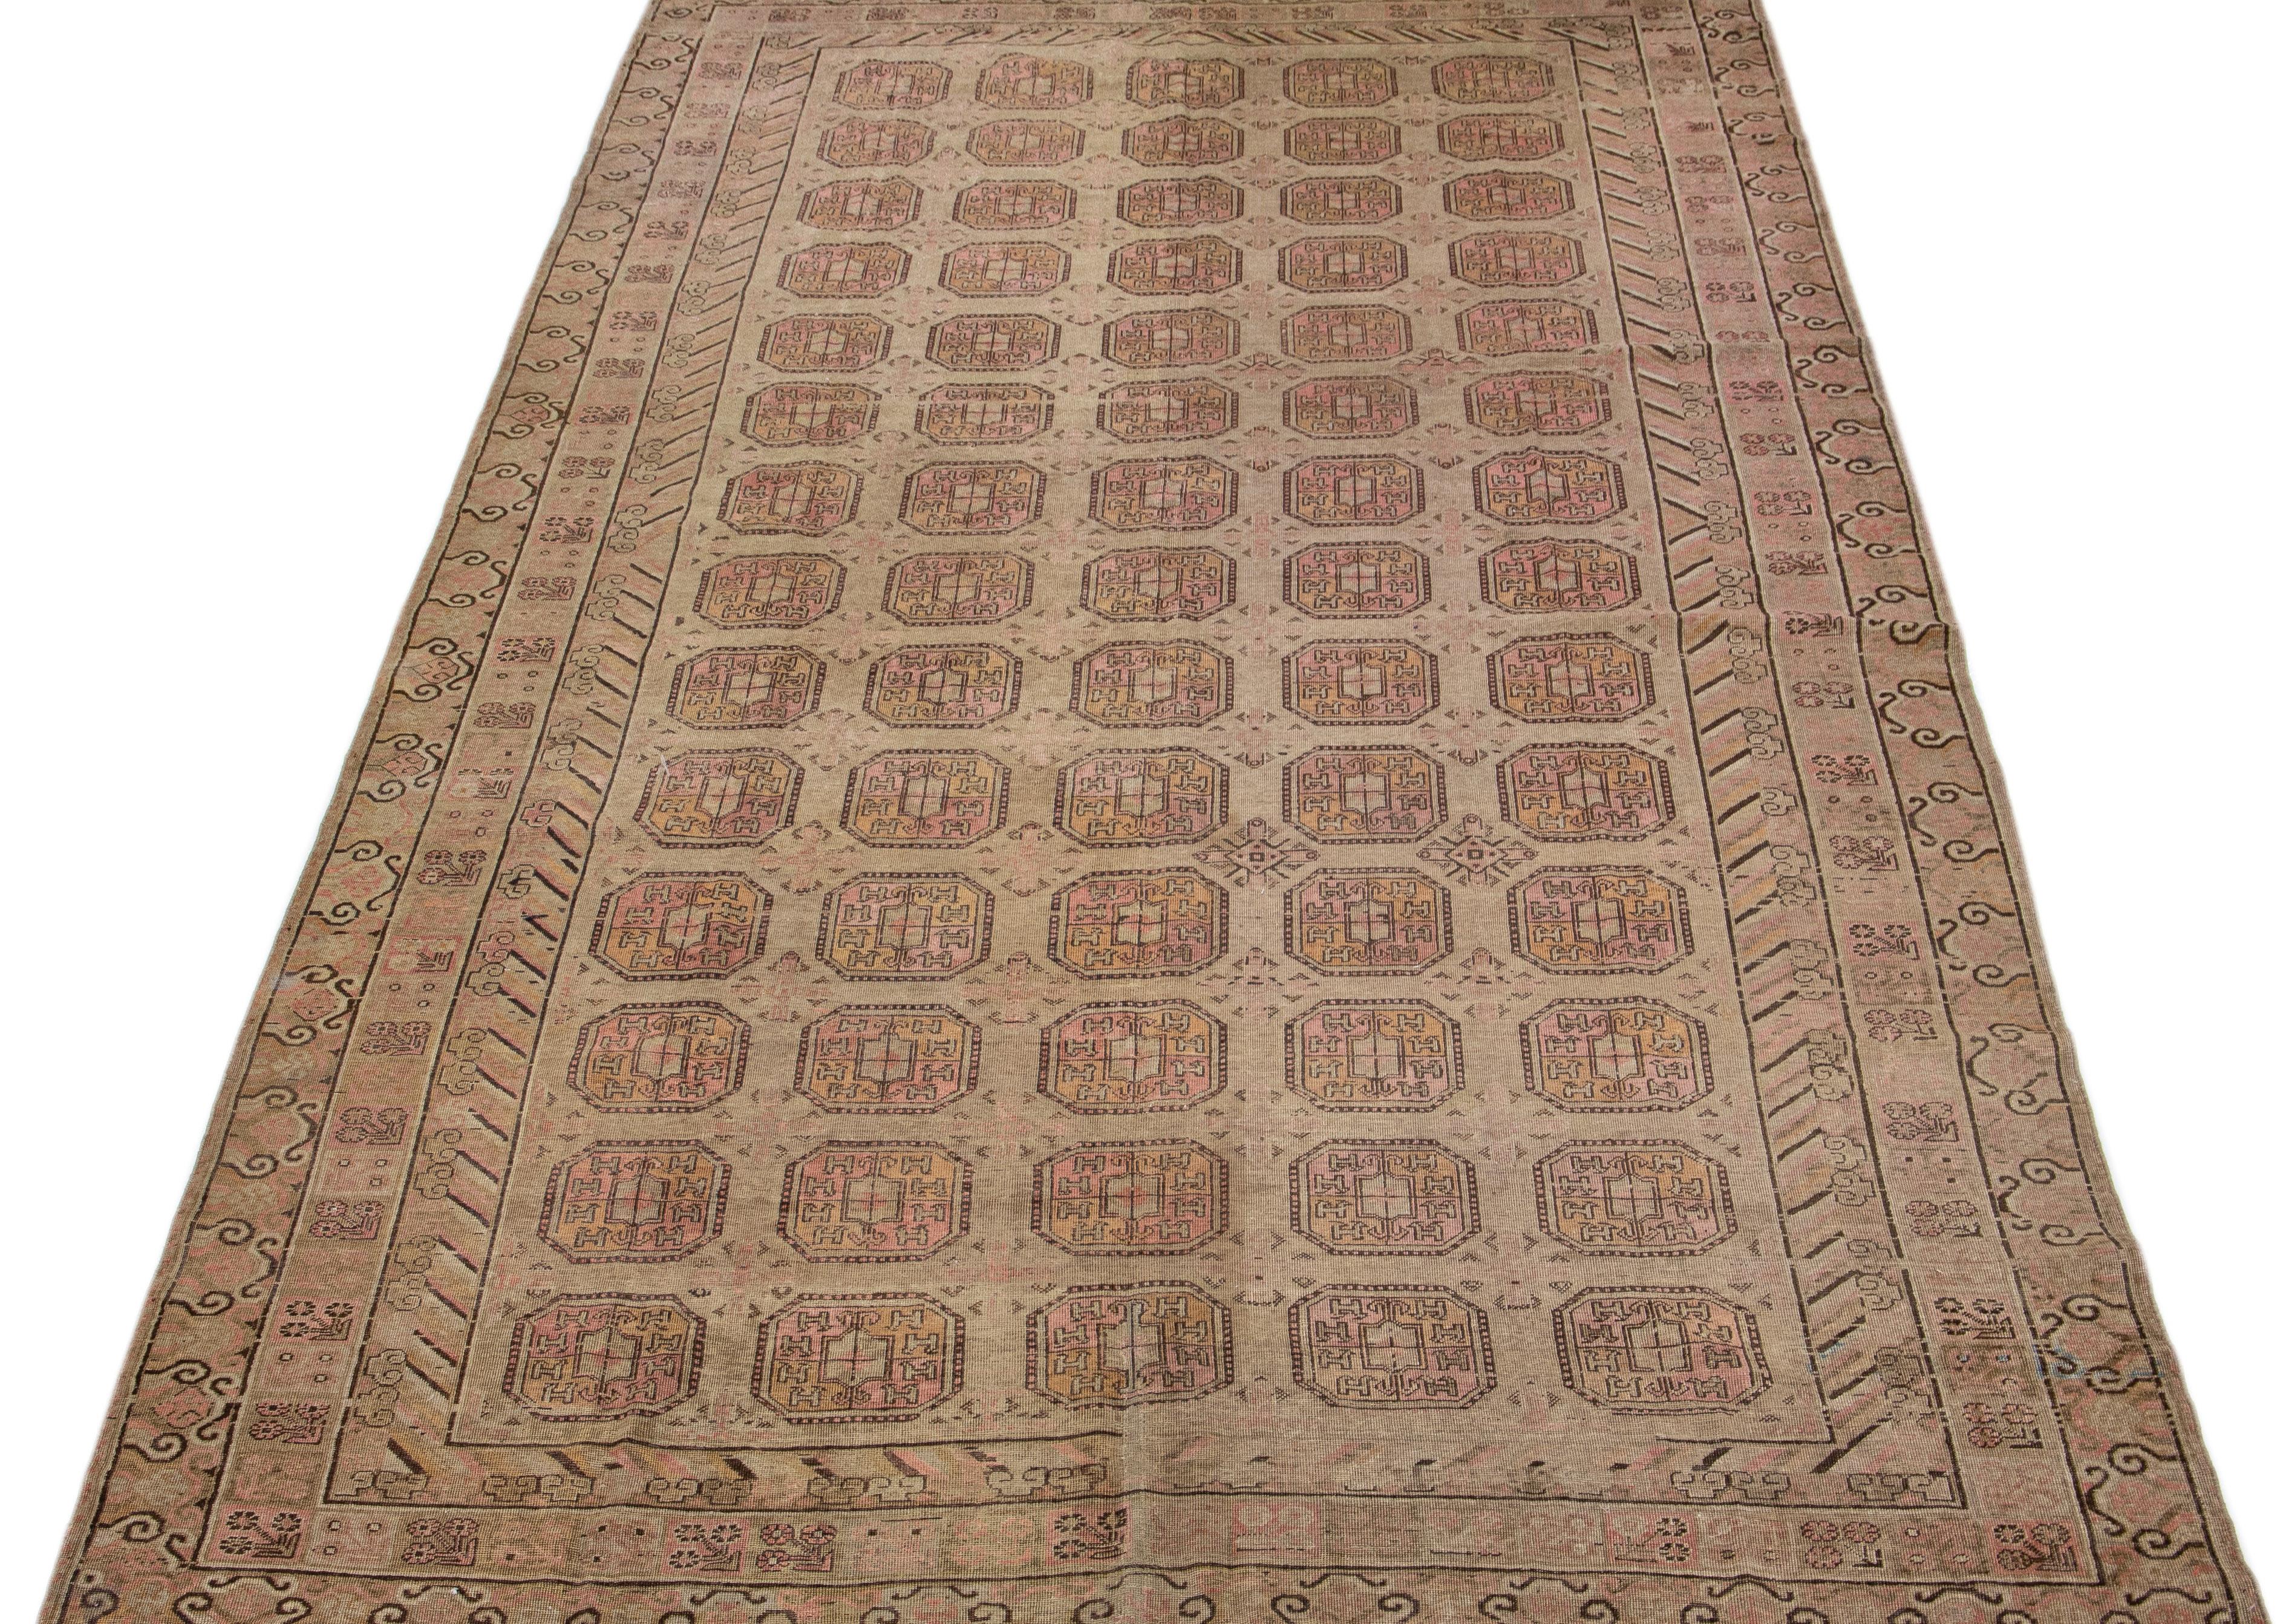 Beautiful antique Khotan hand-knotted wool rug with a brown color field. This Khotan rug has pink, orange, and dark brown accents in a gorgeous geometric multi-medallion pattern. 

This rug measures 8'9